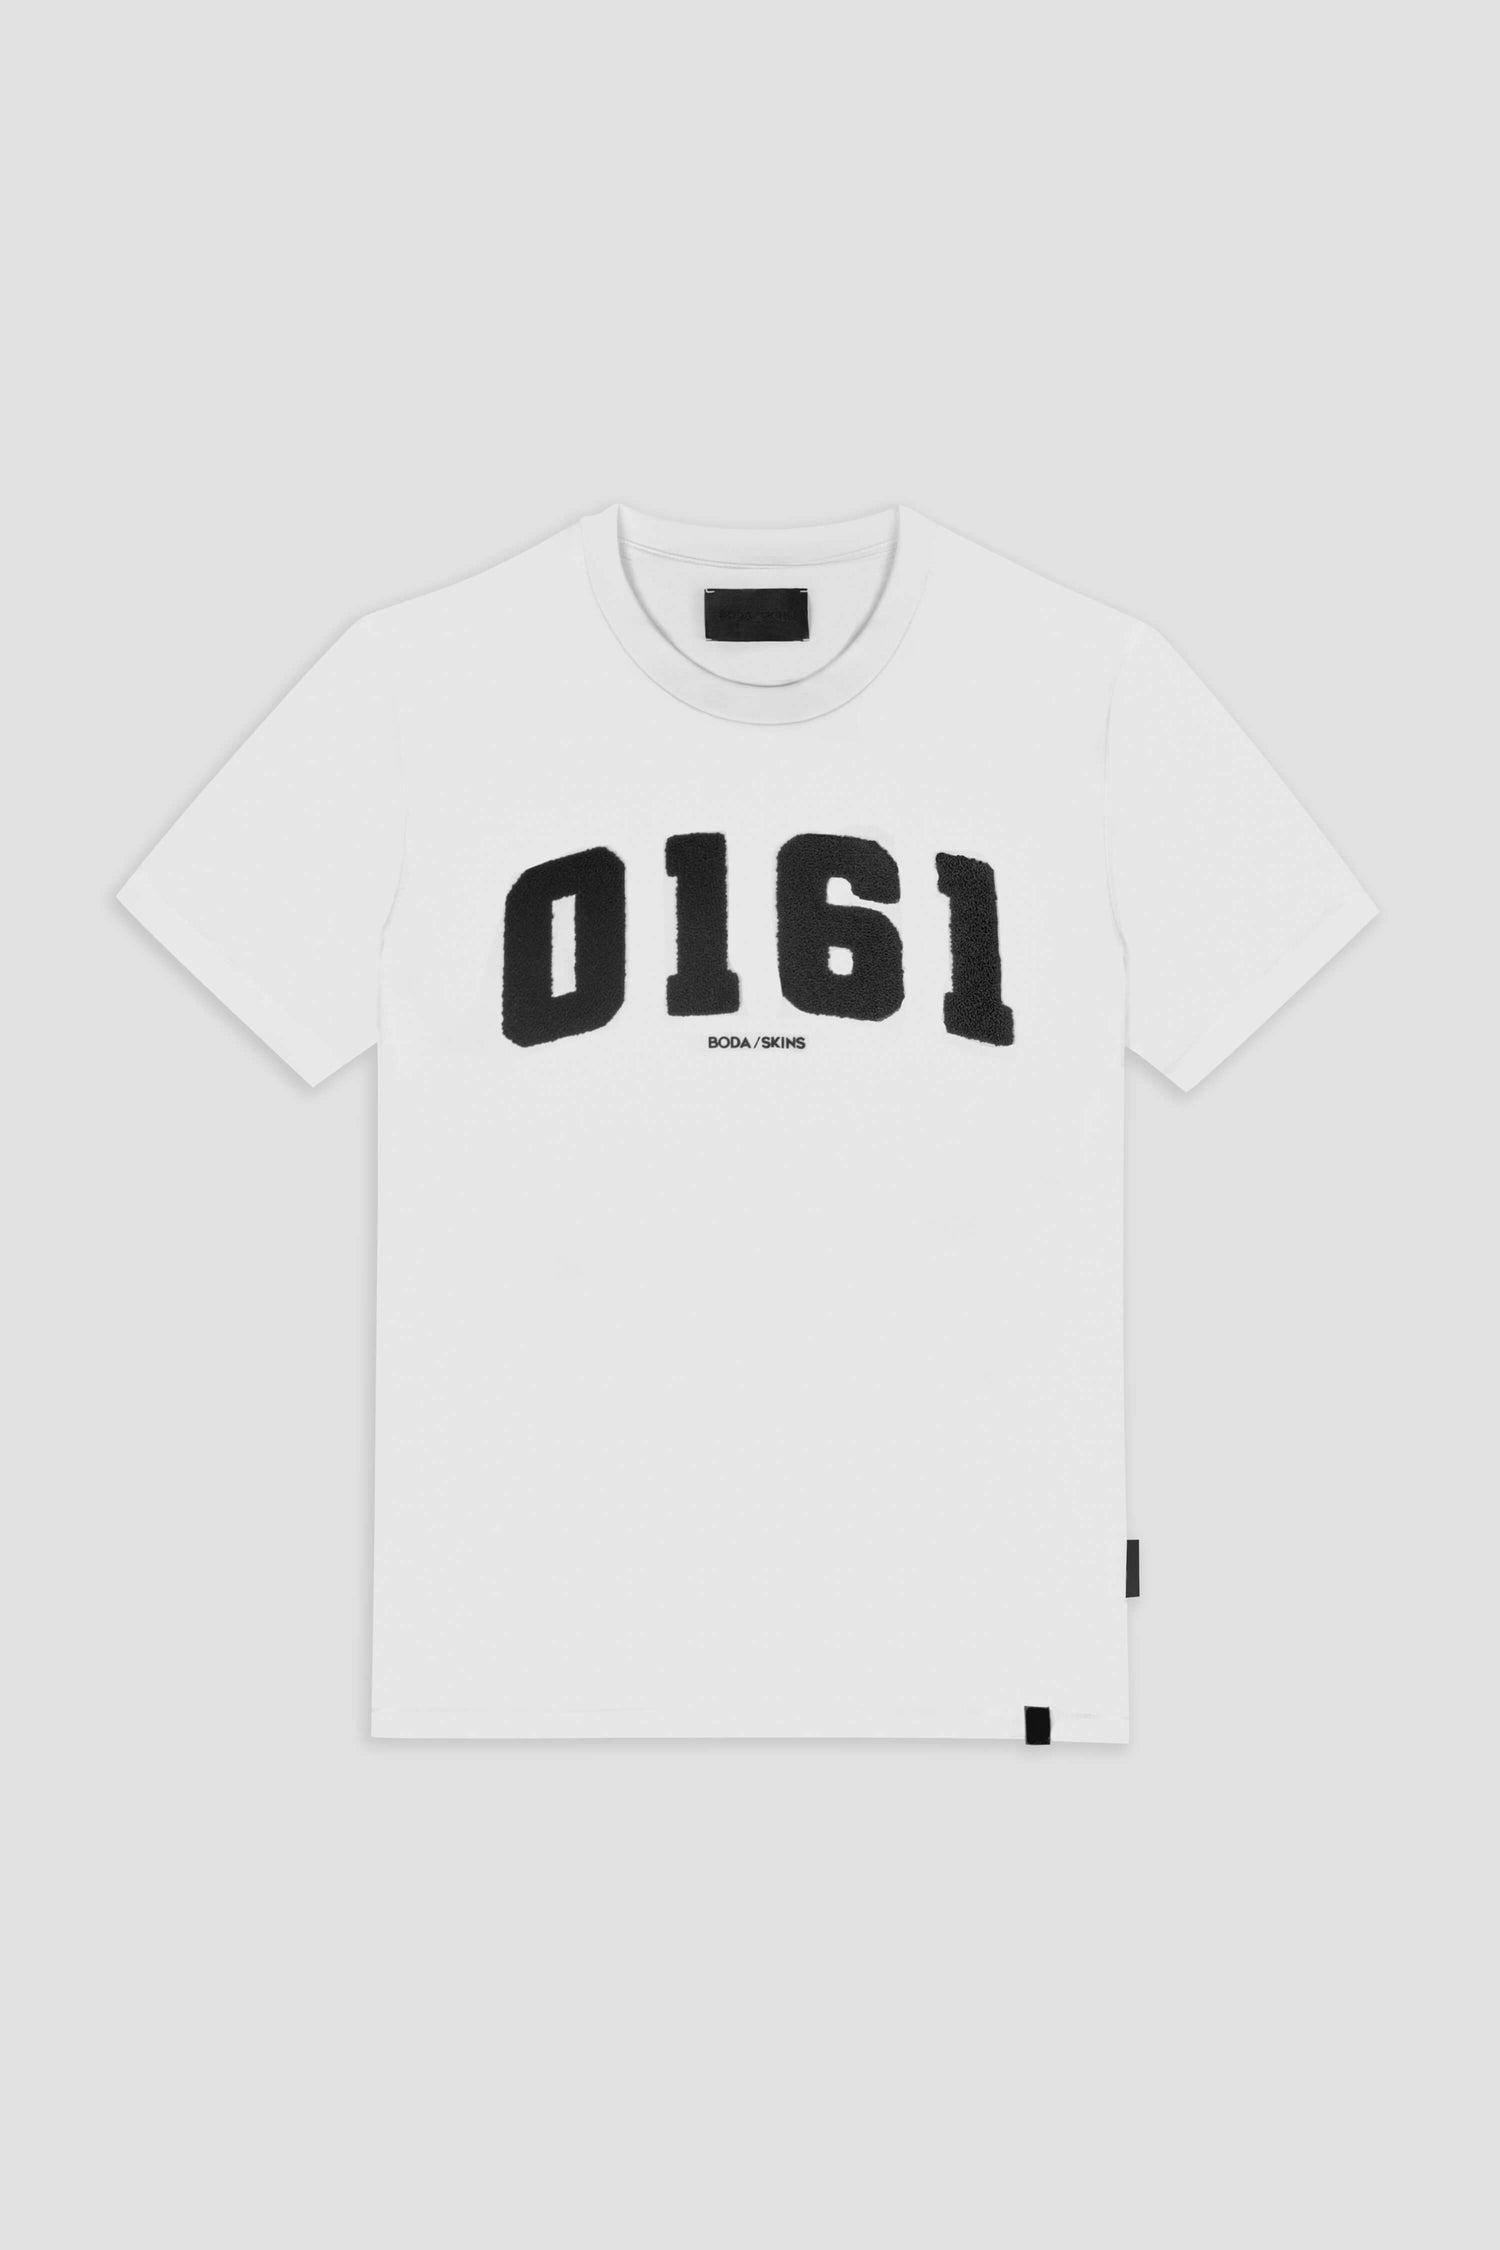 Mens Jersey - By Created Date: Newest to Oldest